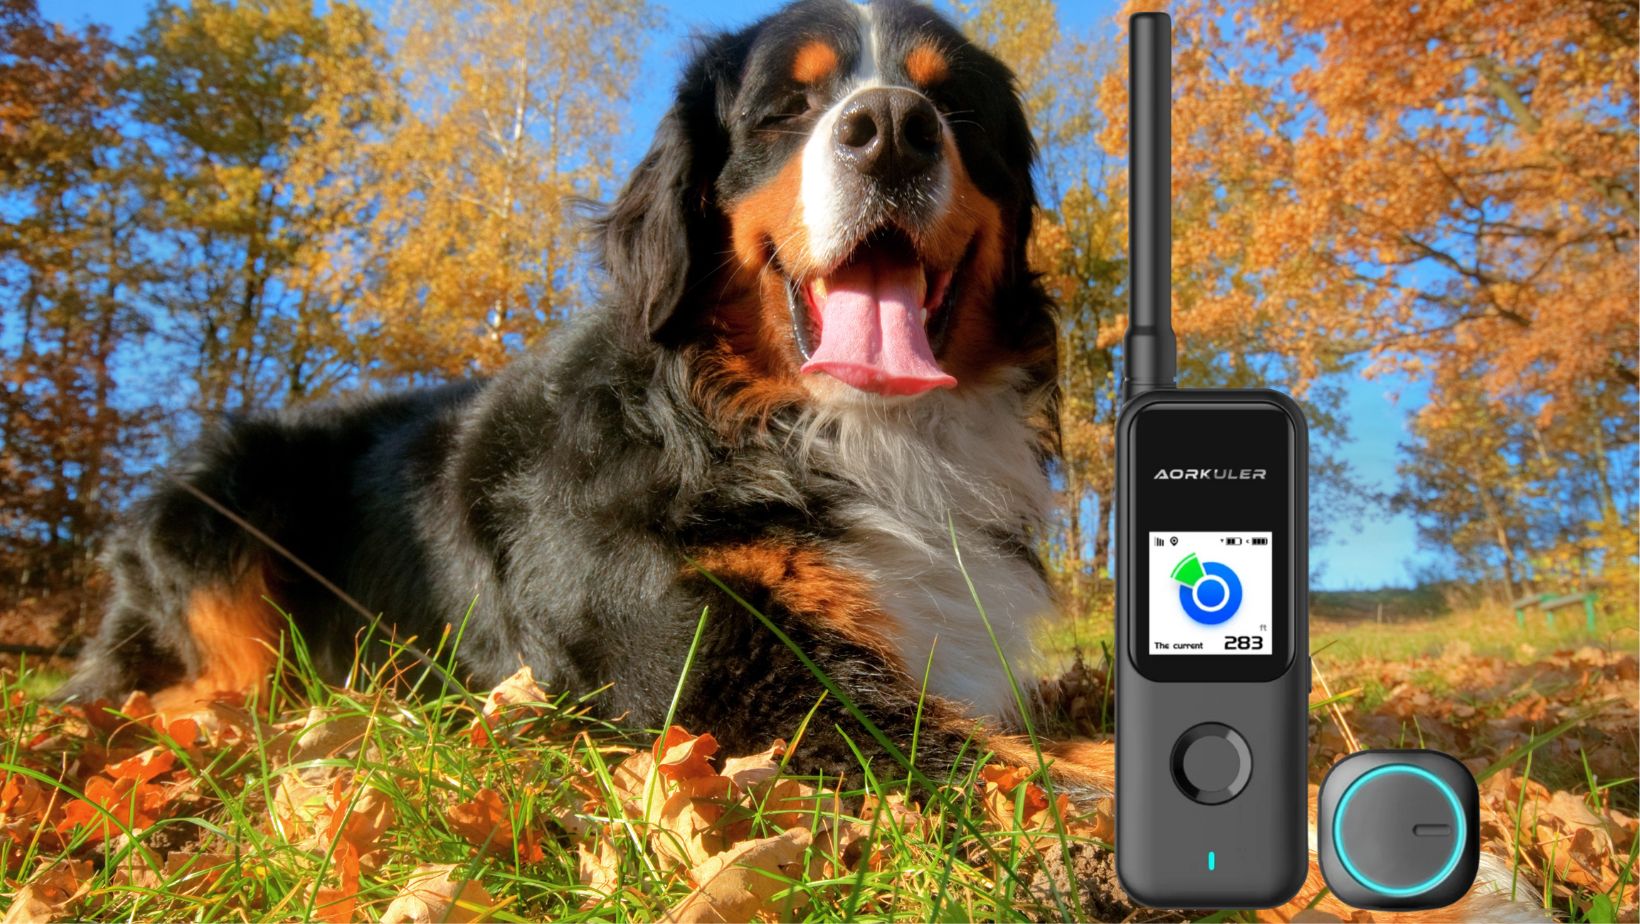 What Does the Aorkuler Dog GPS Tracker Offer?